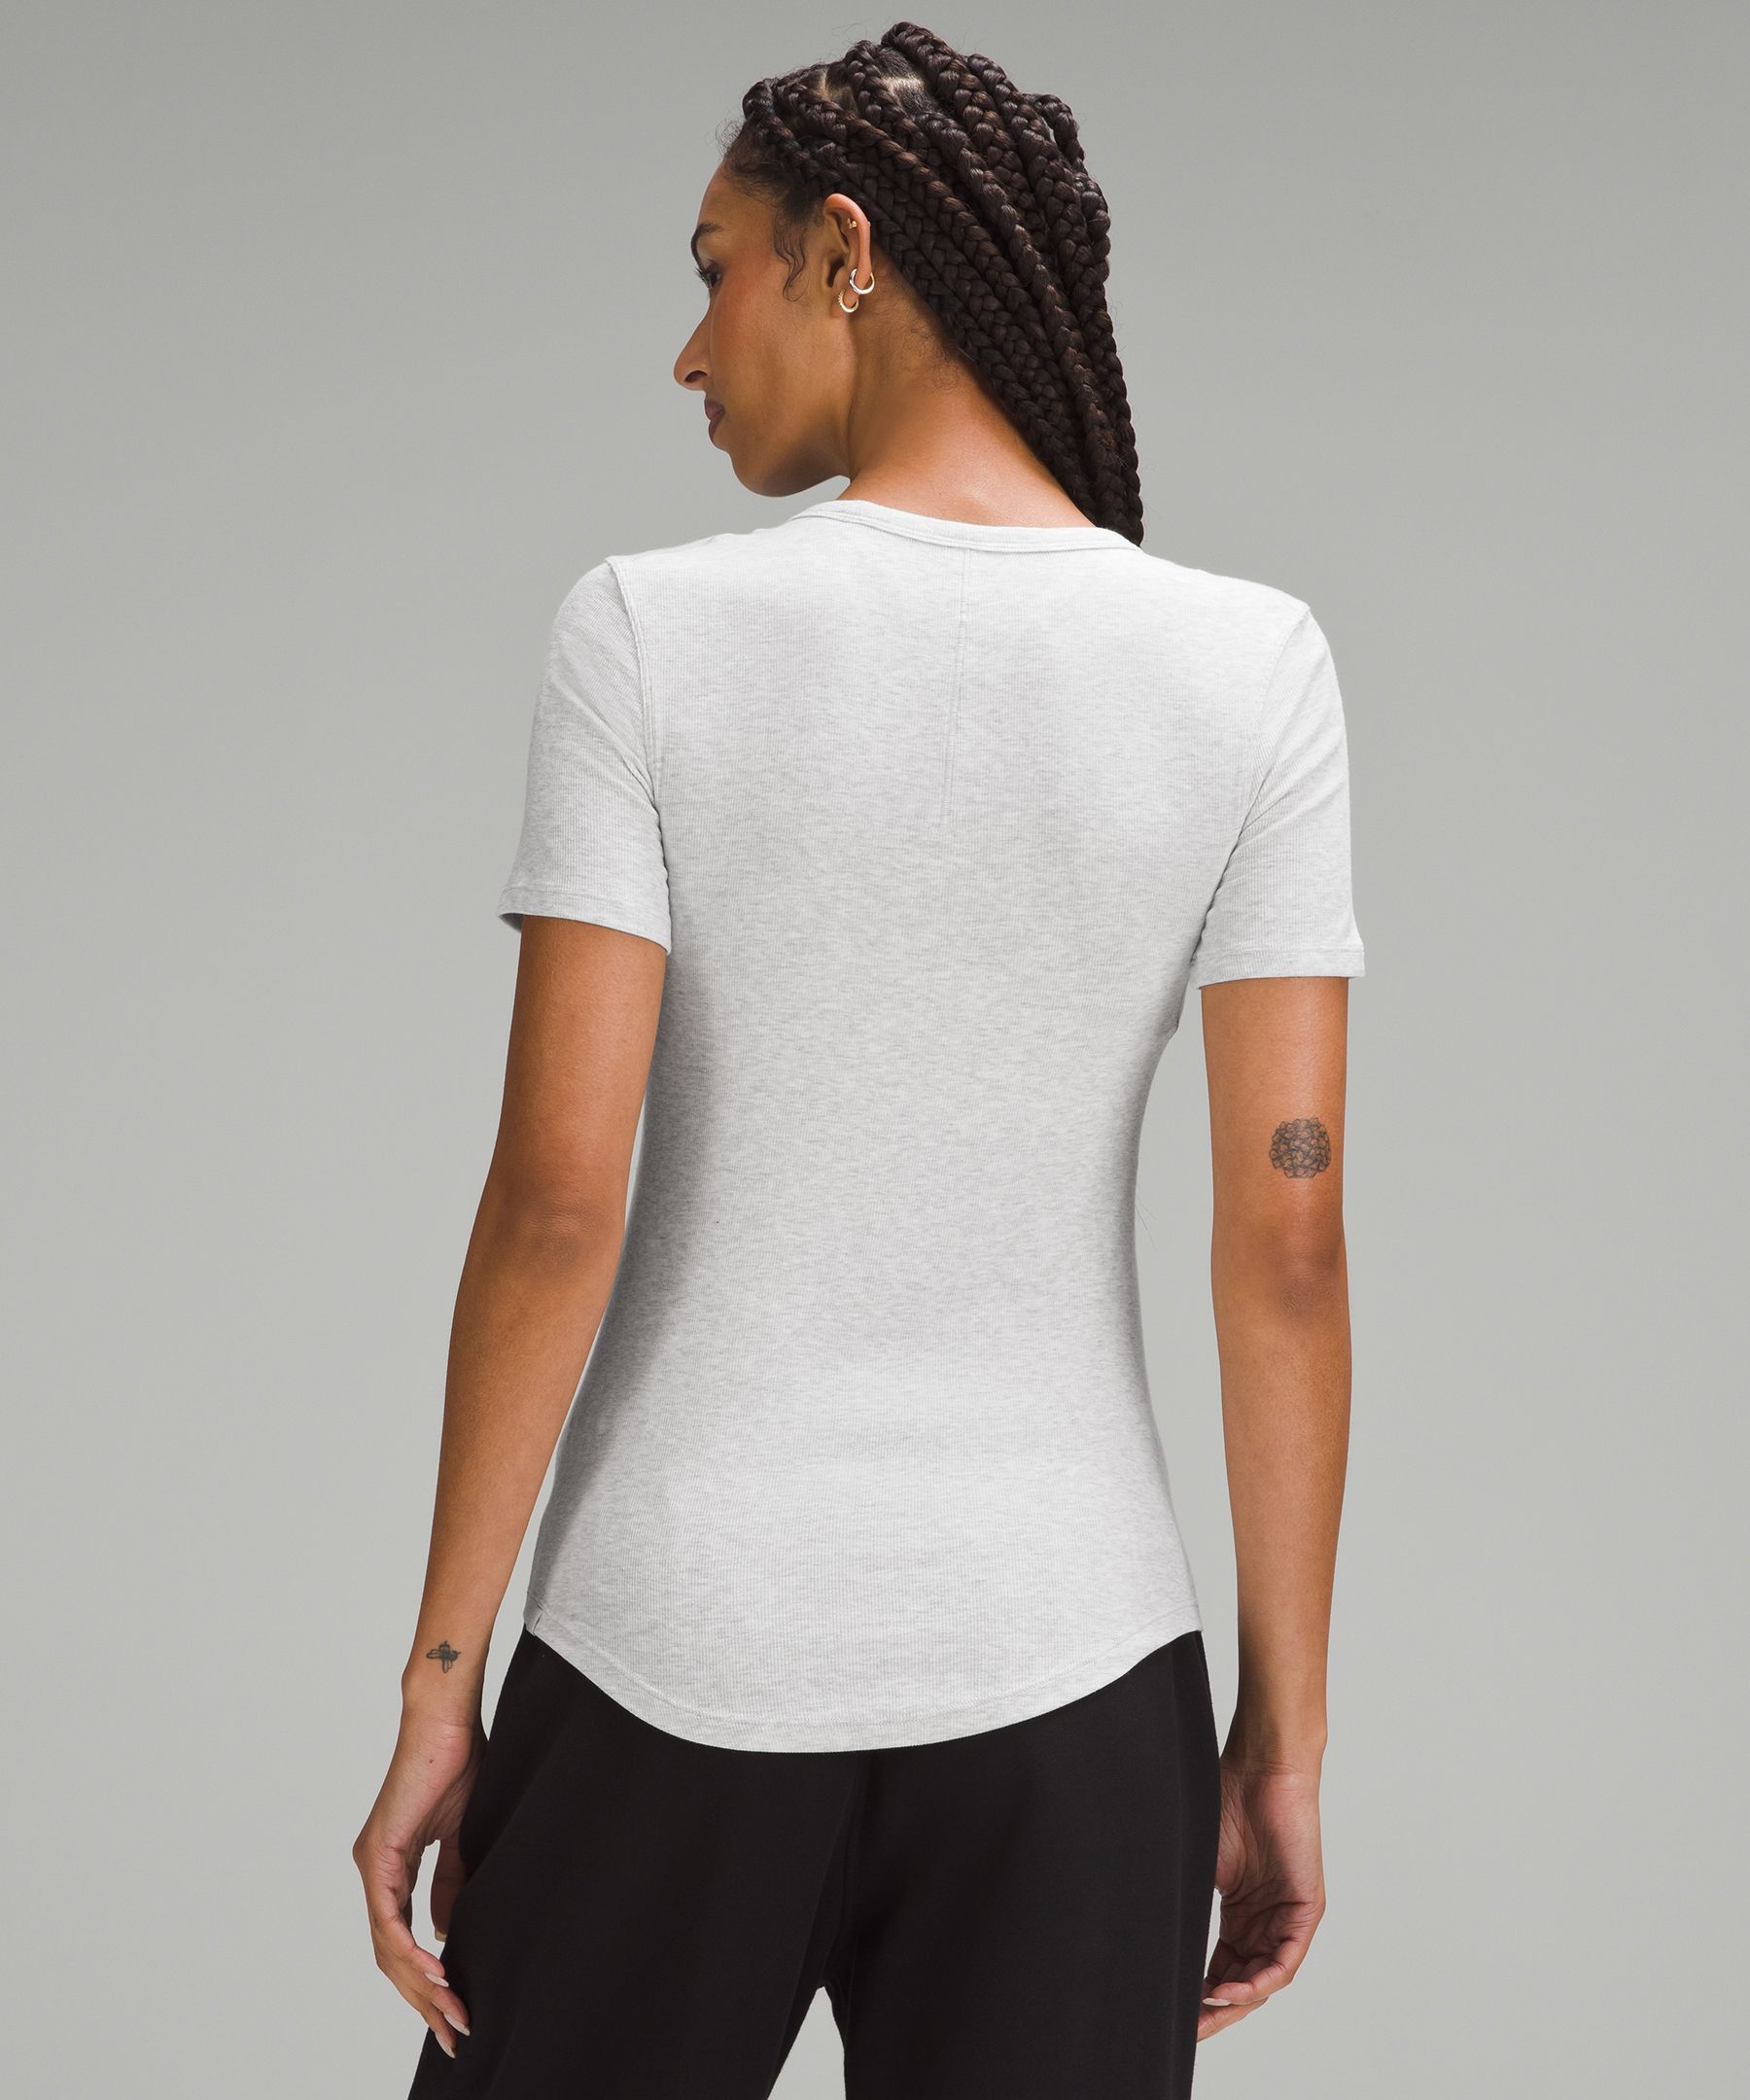 Lululemon Hold Tight Cropped T Shirt Women Size 12 Color White